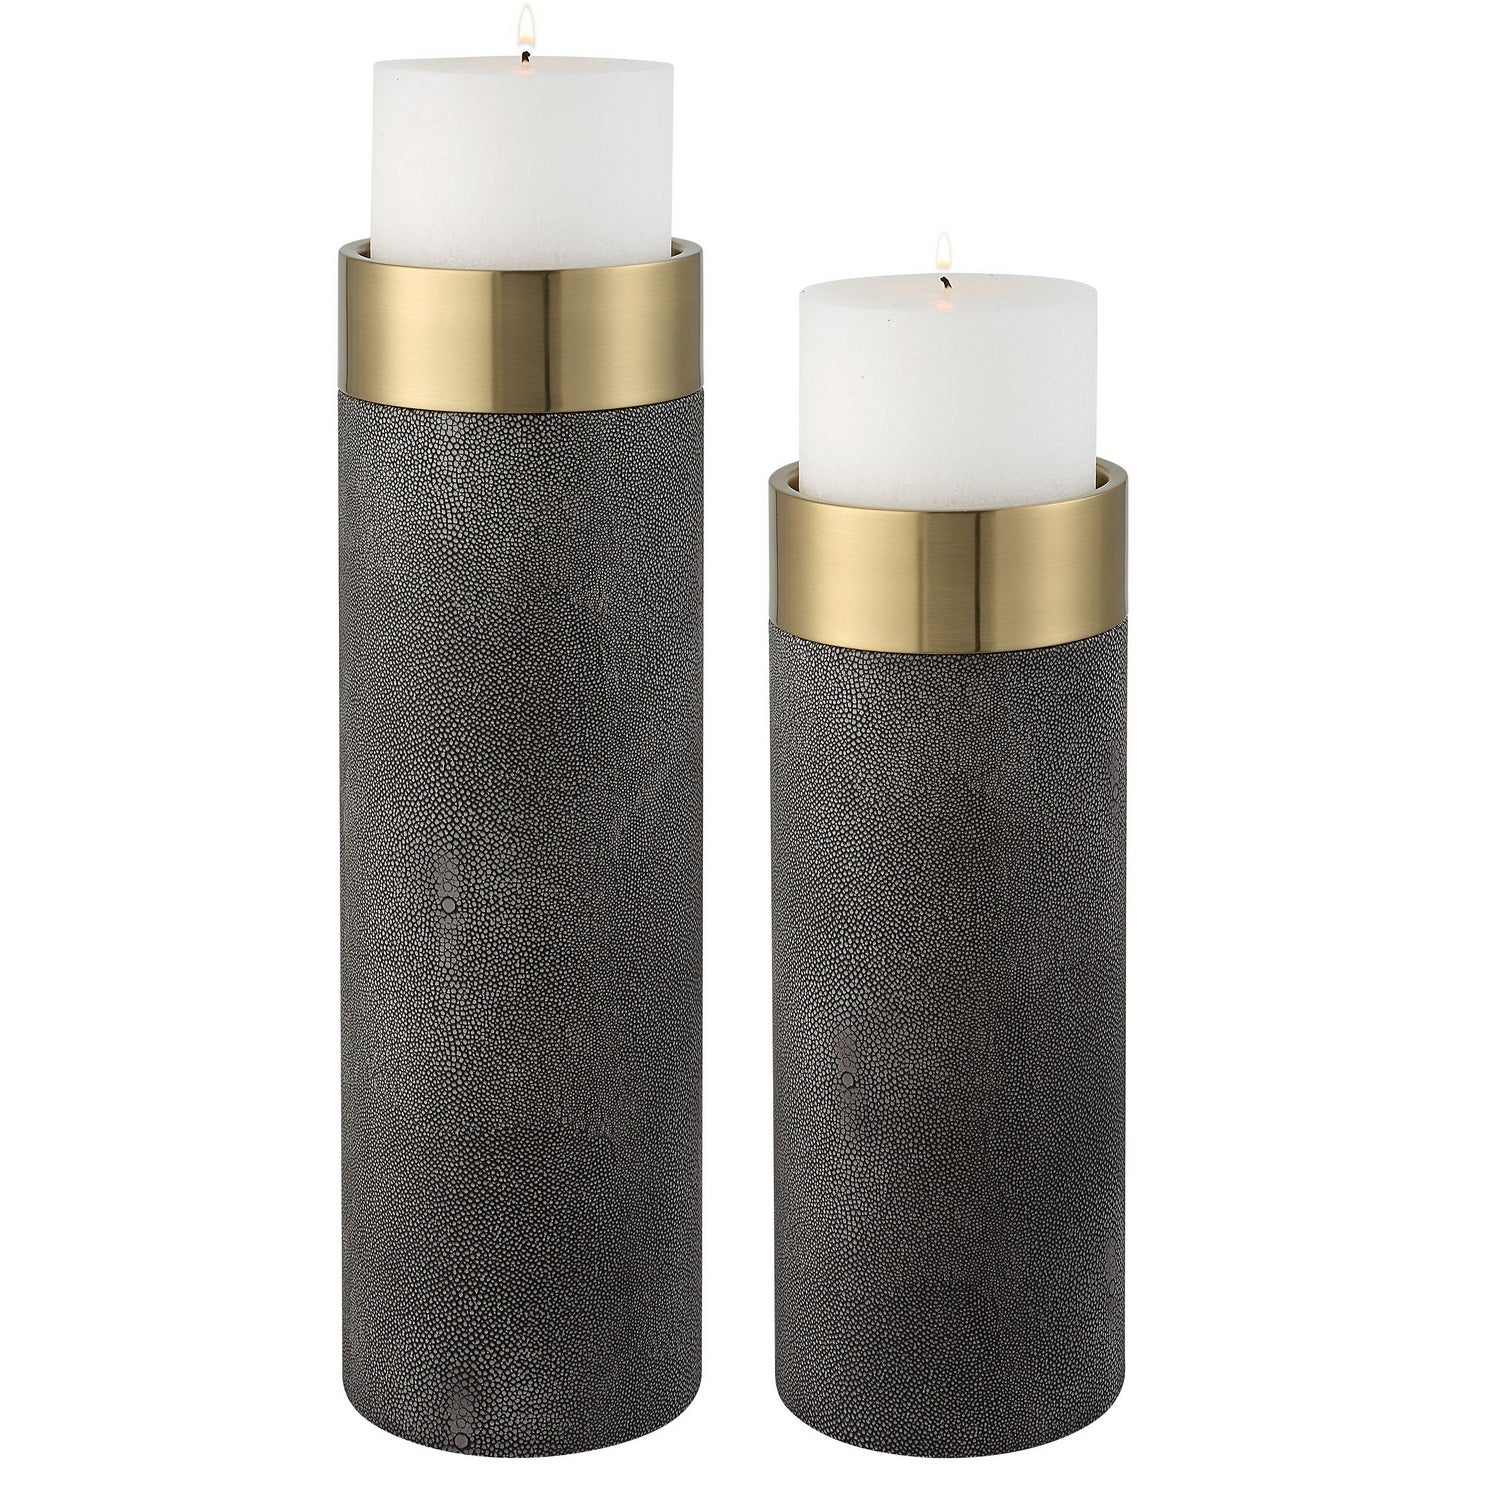 Uttermost - Candleholders, S/2 - Wessex - Antique Brushed Brass- Union Lighting Luminaires Decor